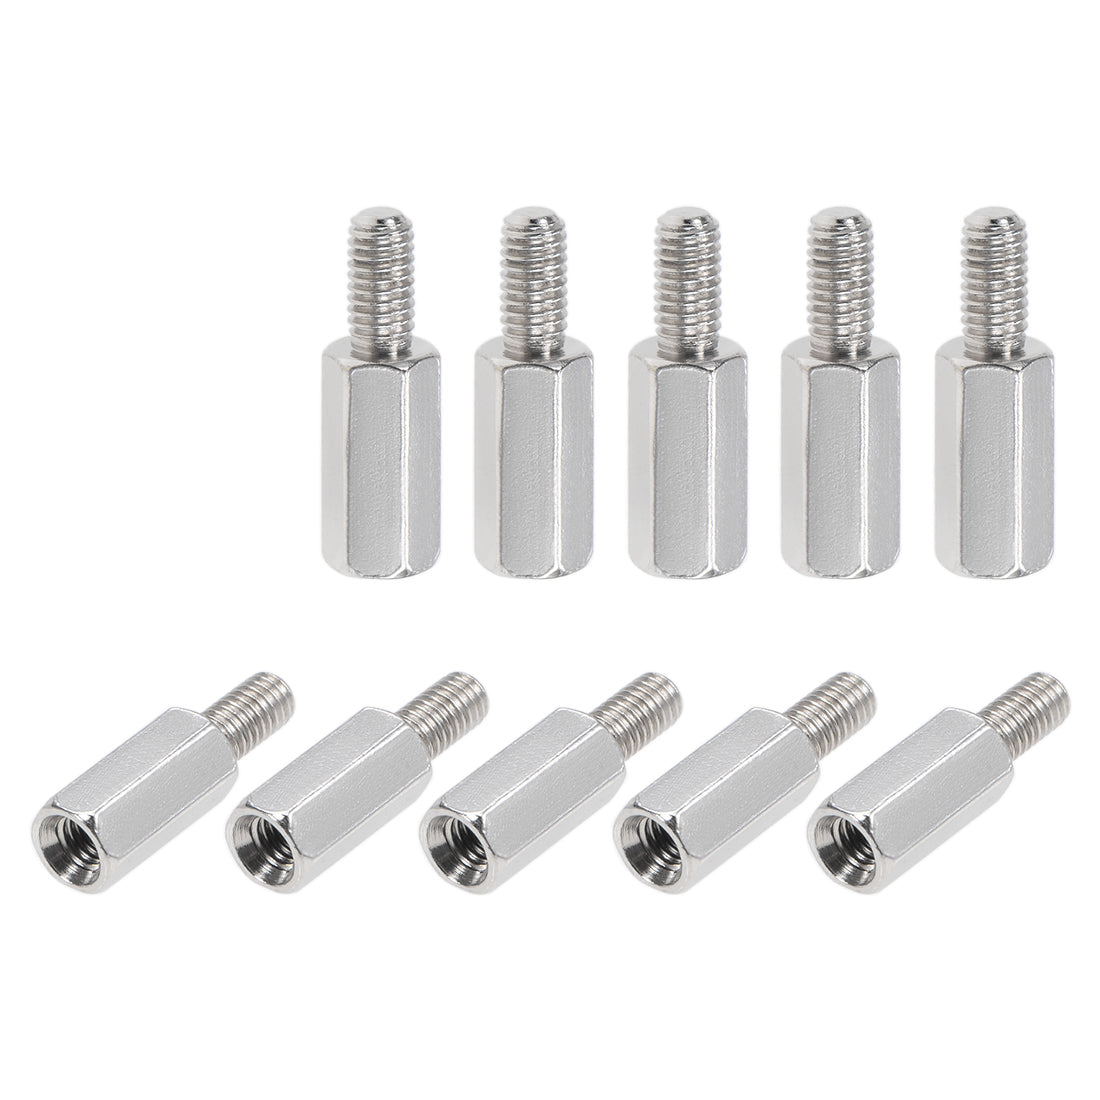 Uxcell Uxcell M3 x 45 mm + 6 mm Male to Female Hex Nickel Plated Spacer Standoff 10pcs